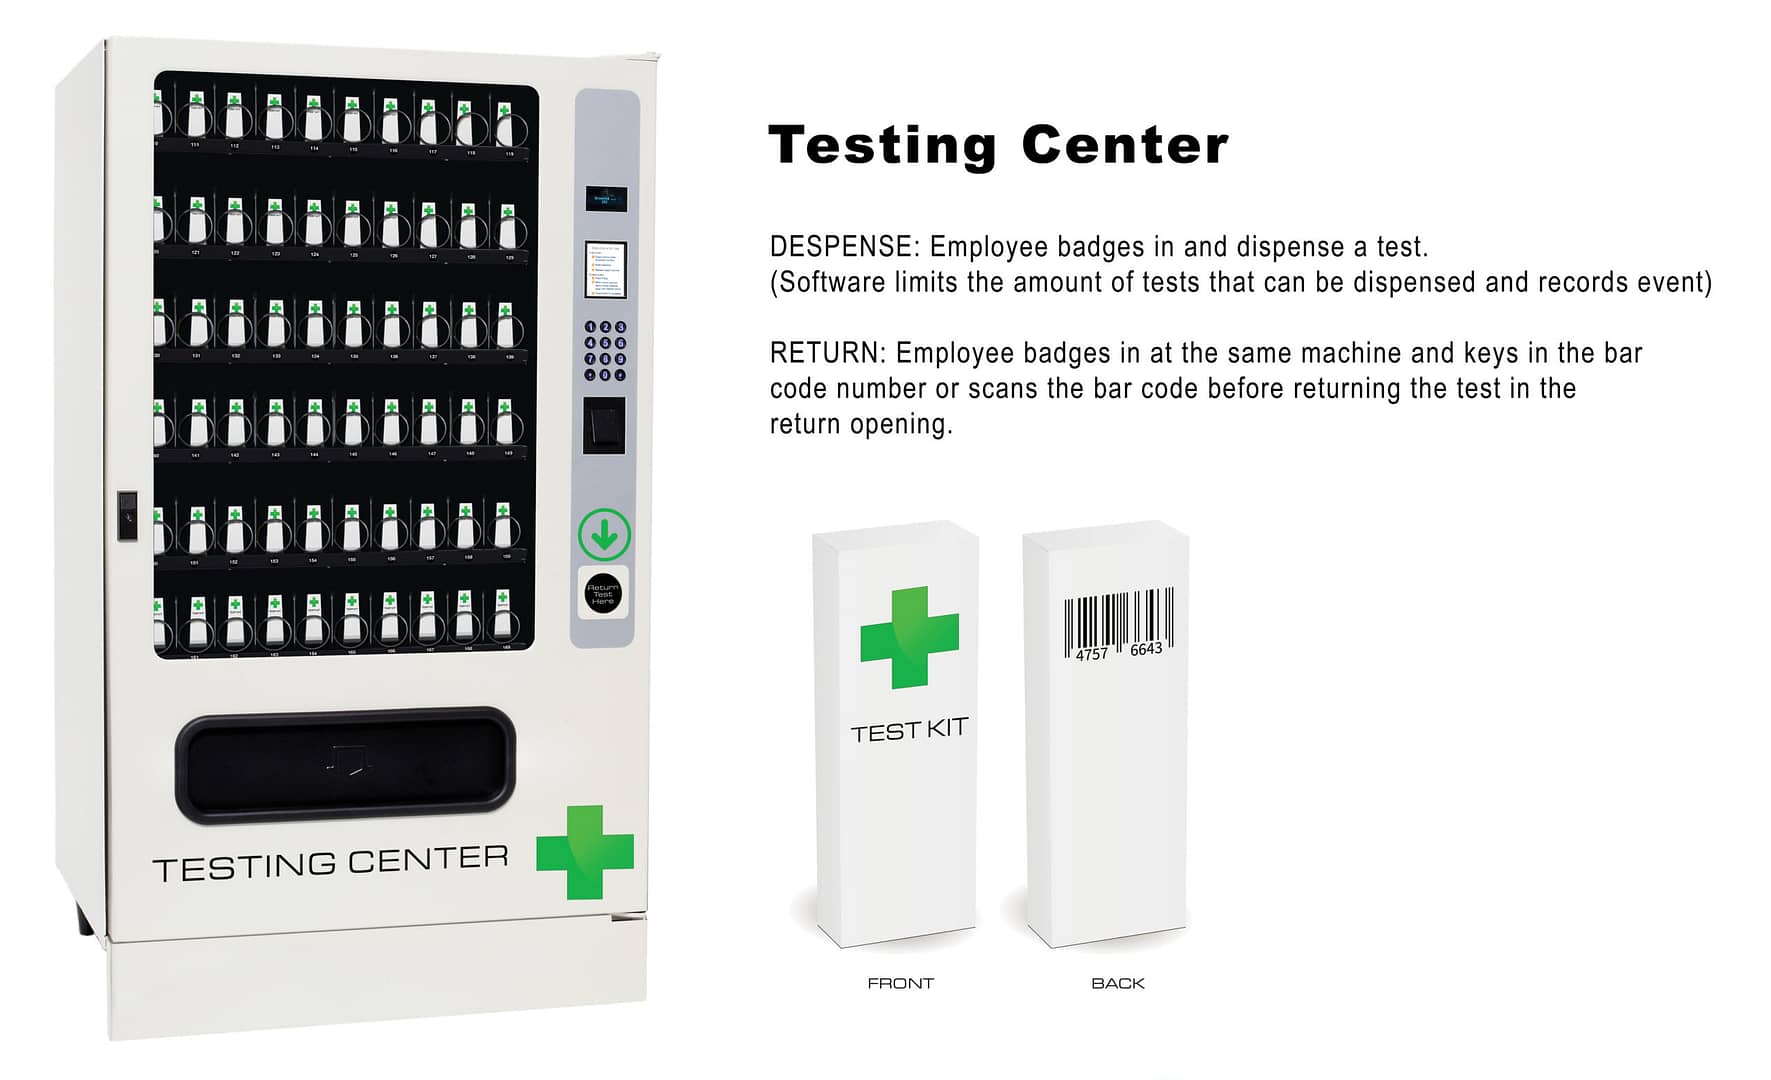 The COVID-19 Testing Center, including the dispense and return center